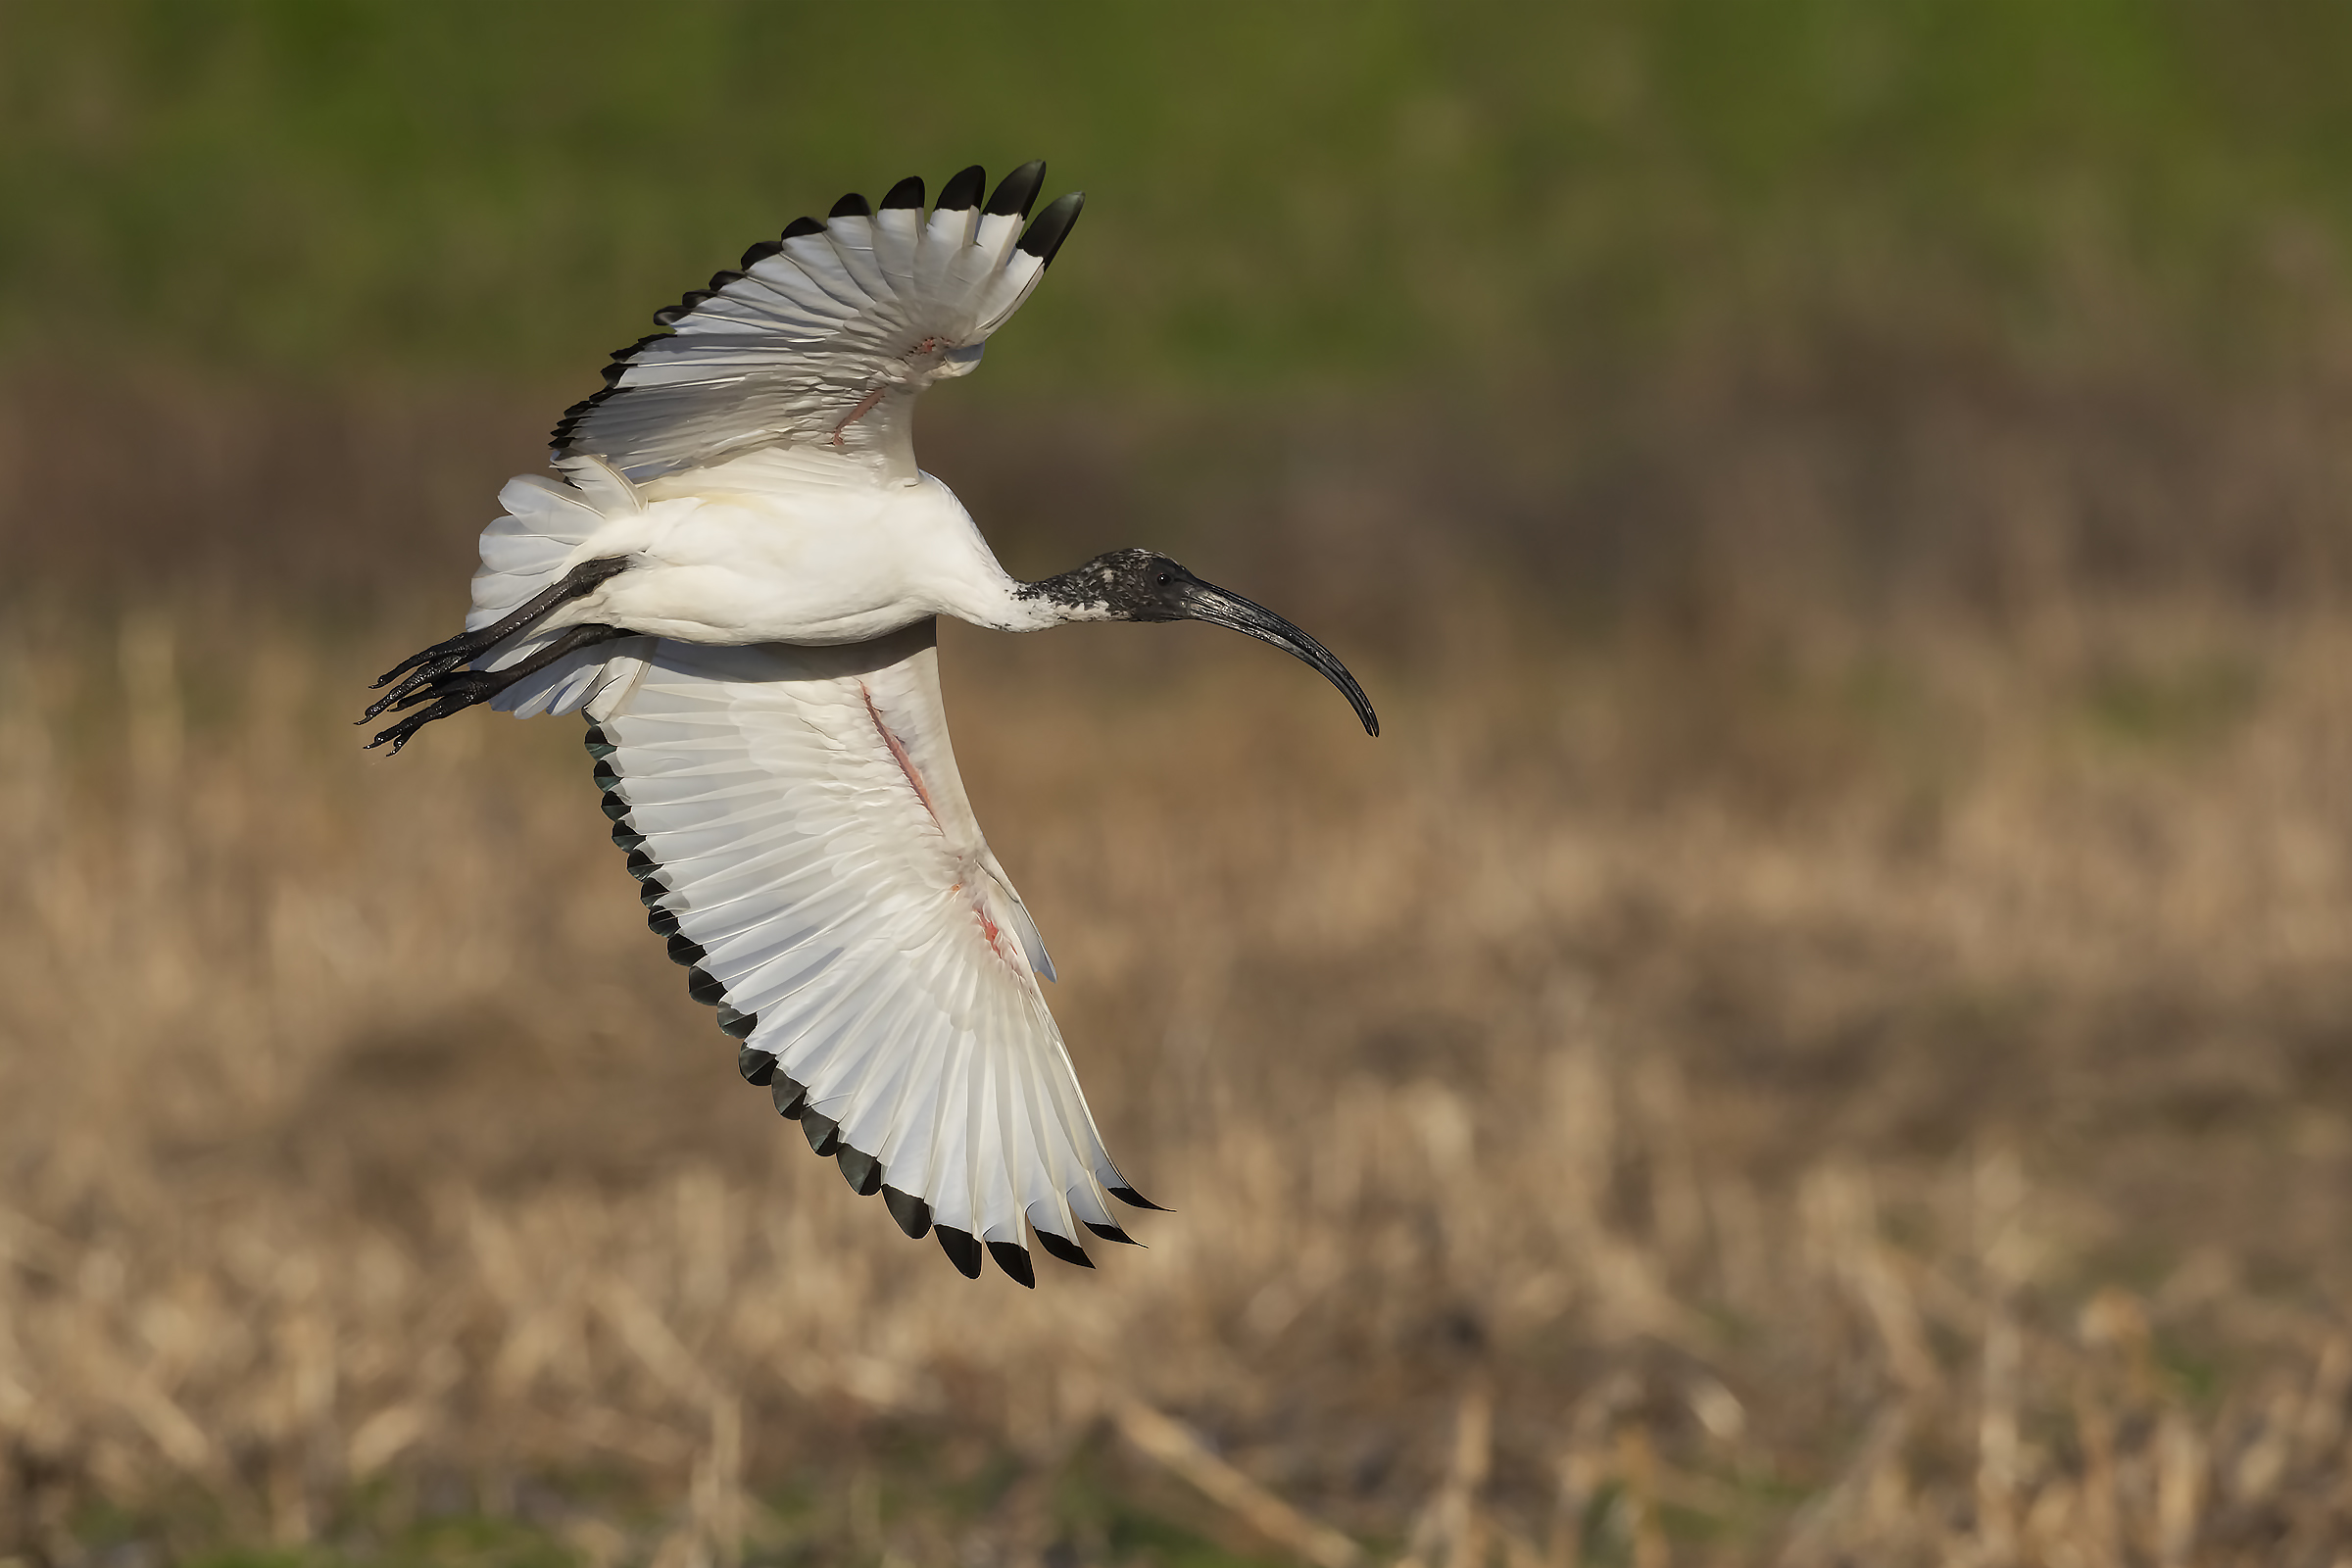 The turn of the sacred Ibis...